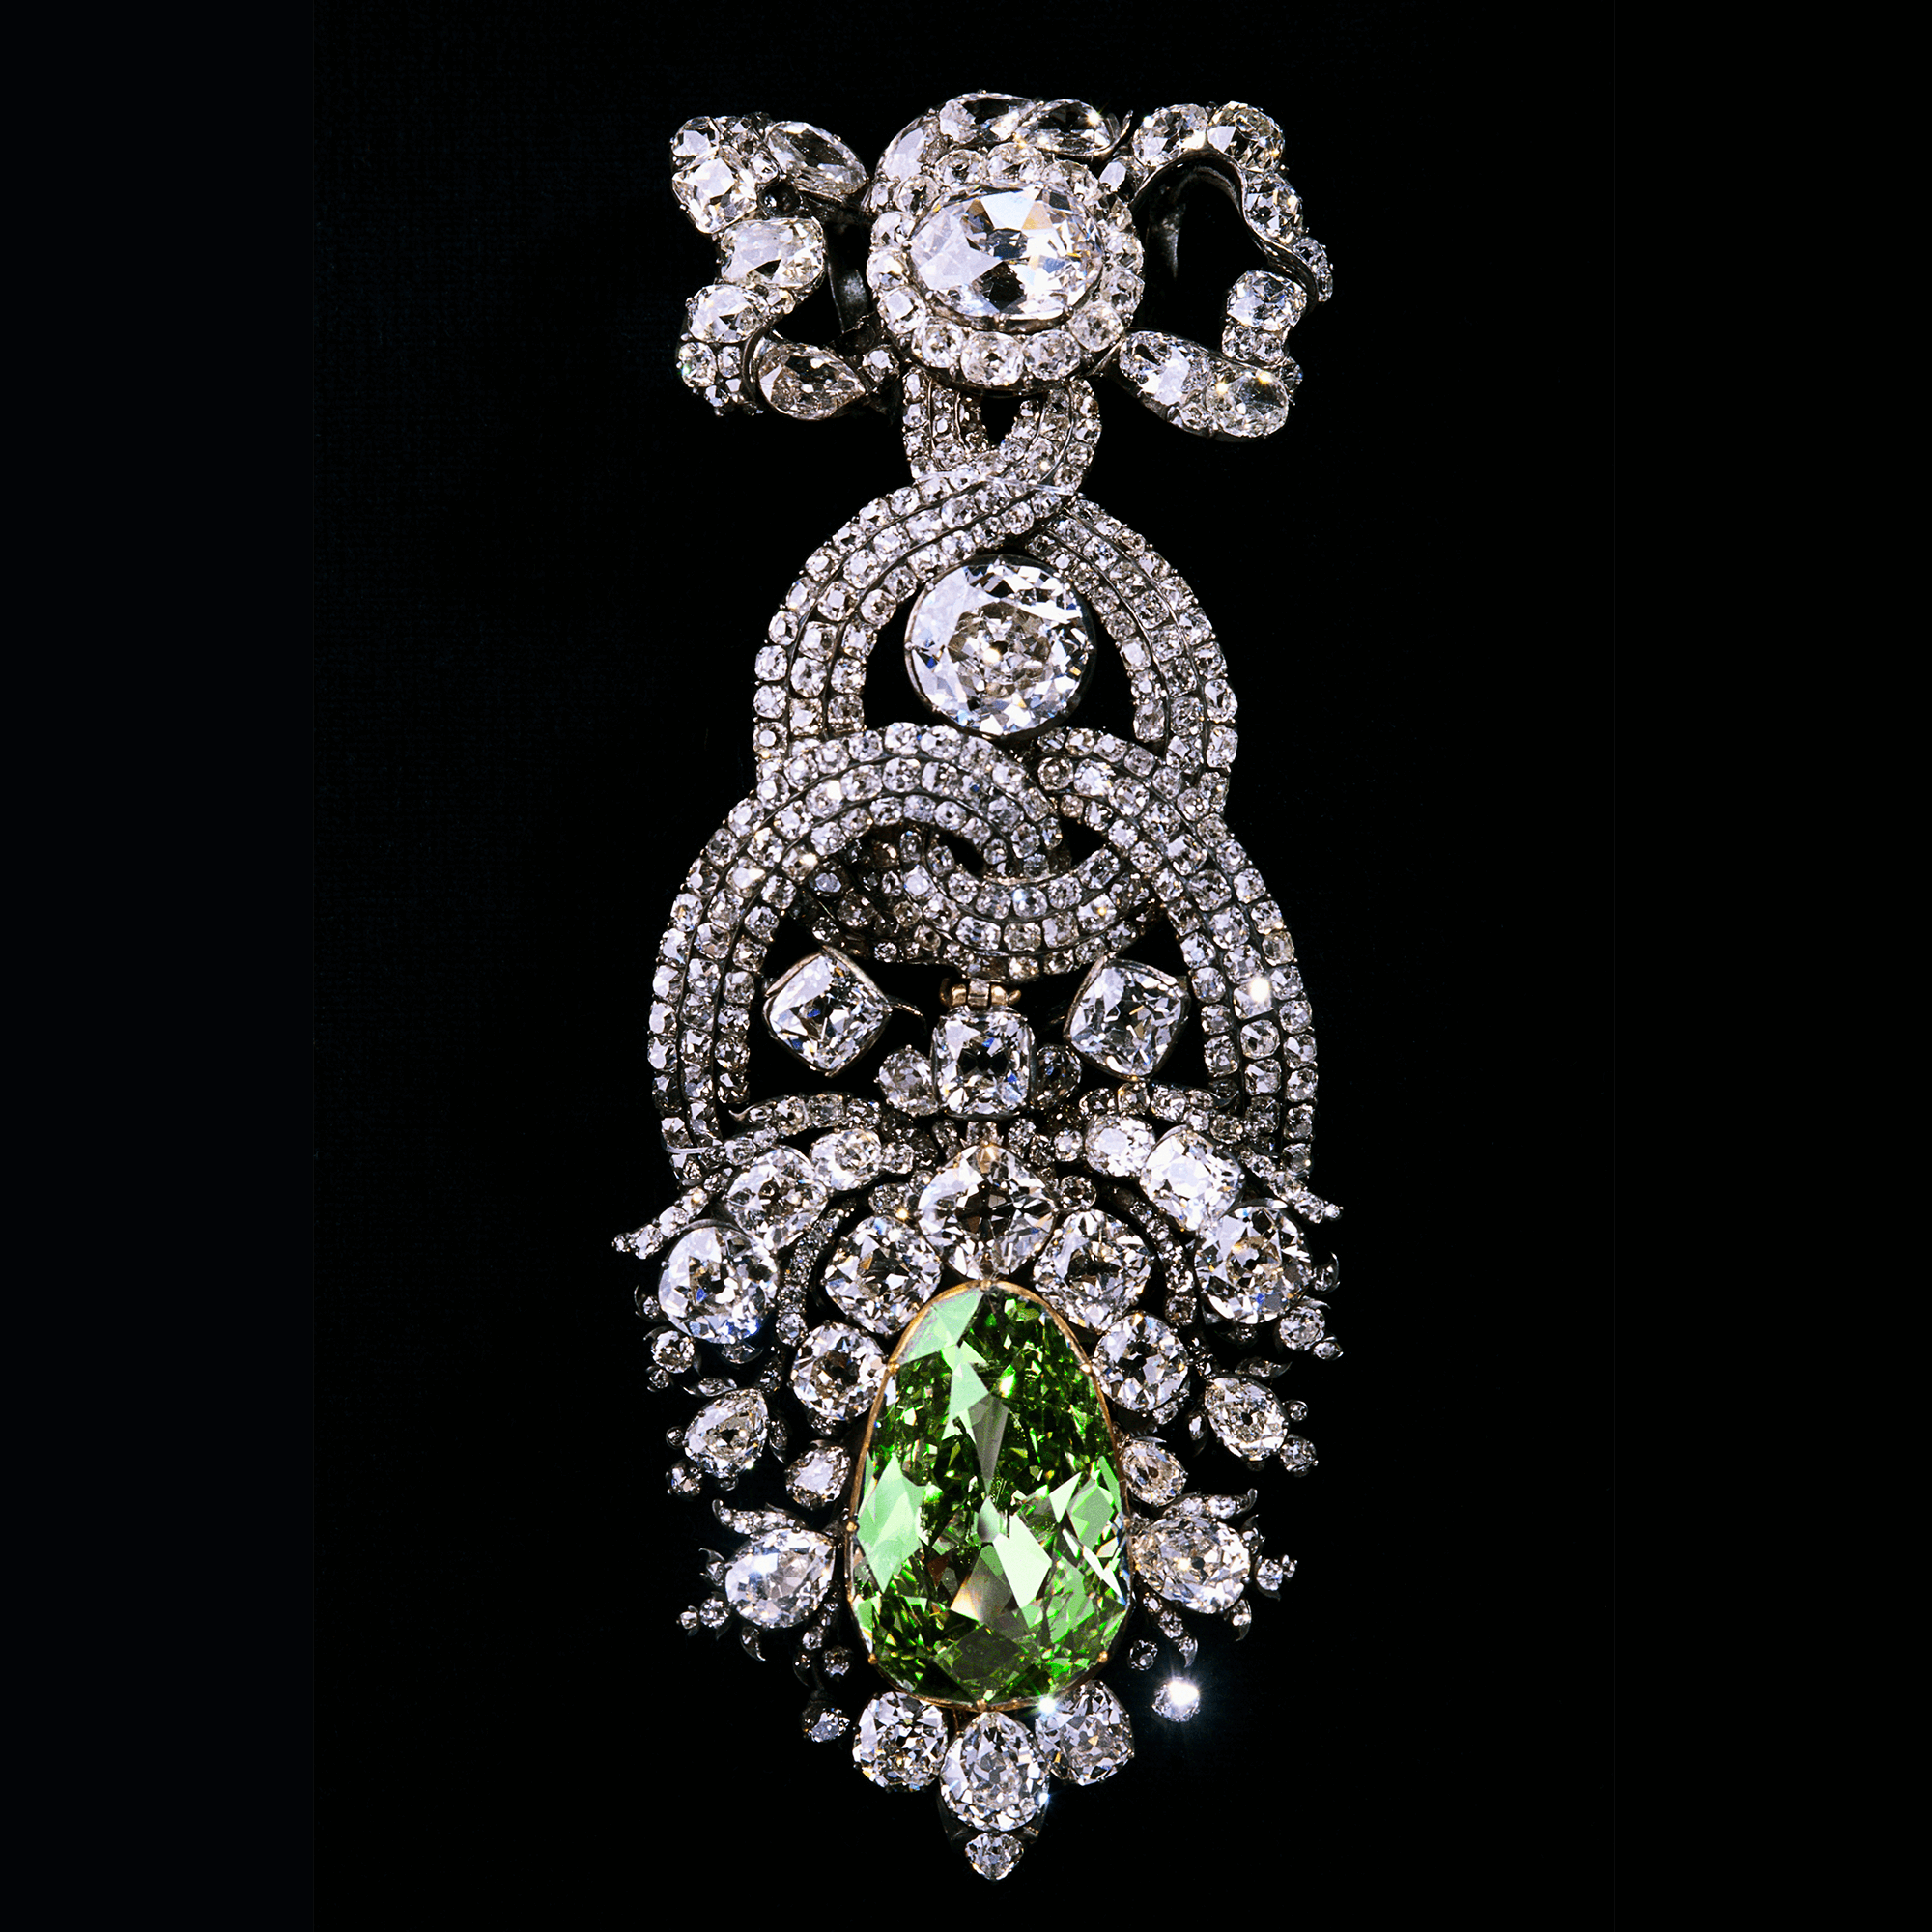 The Dresden Green Diamond: a modified pear-shaped pendeloque 40-carat green diamond decorated with several round cut diamonds set into a bejeweled hat ornament